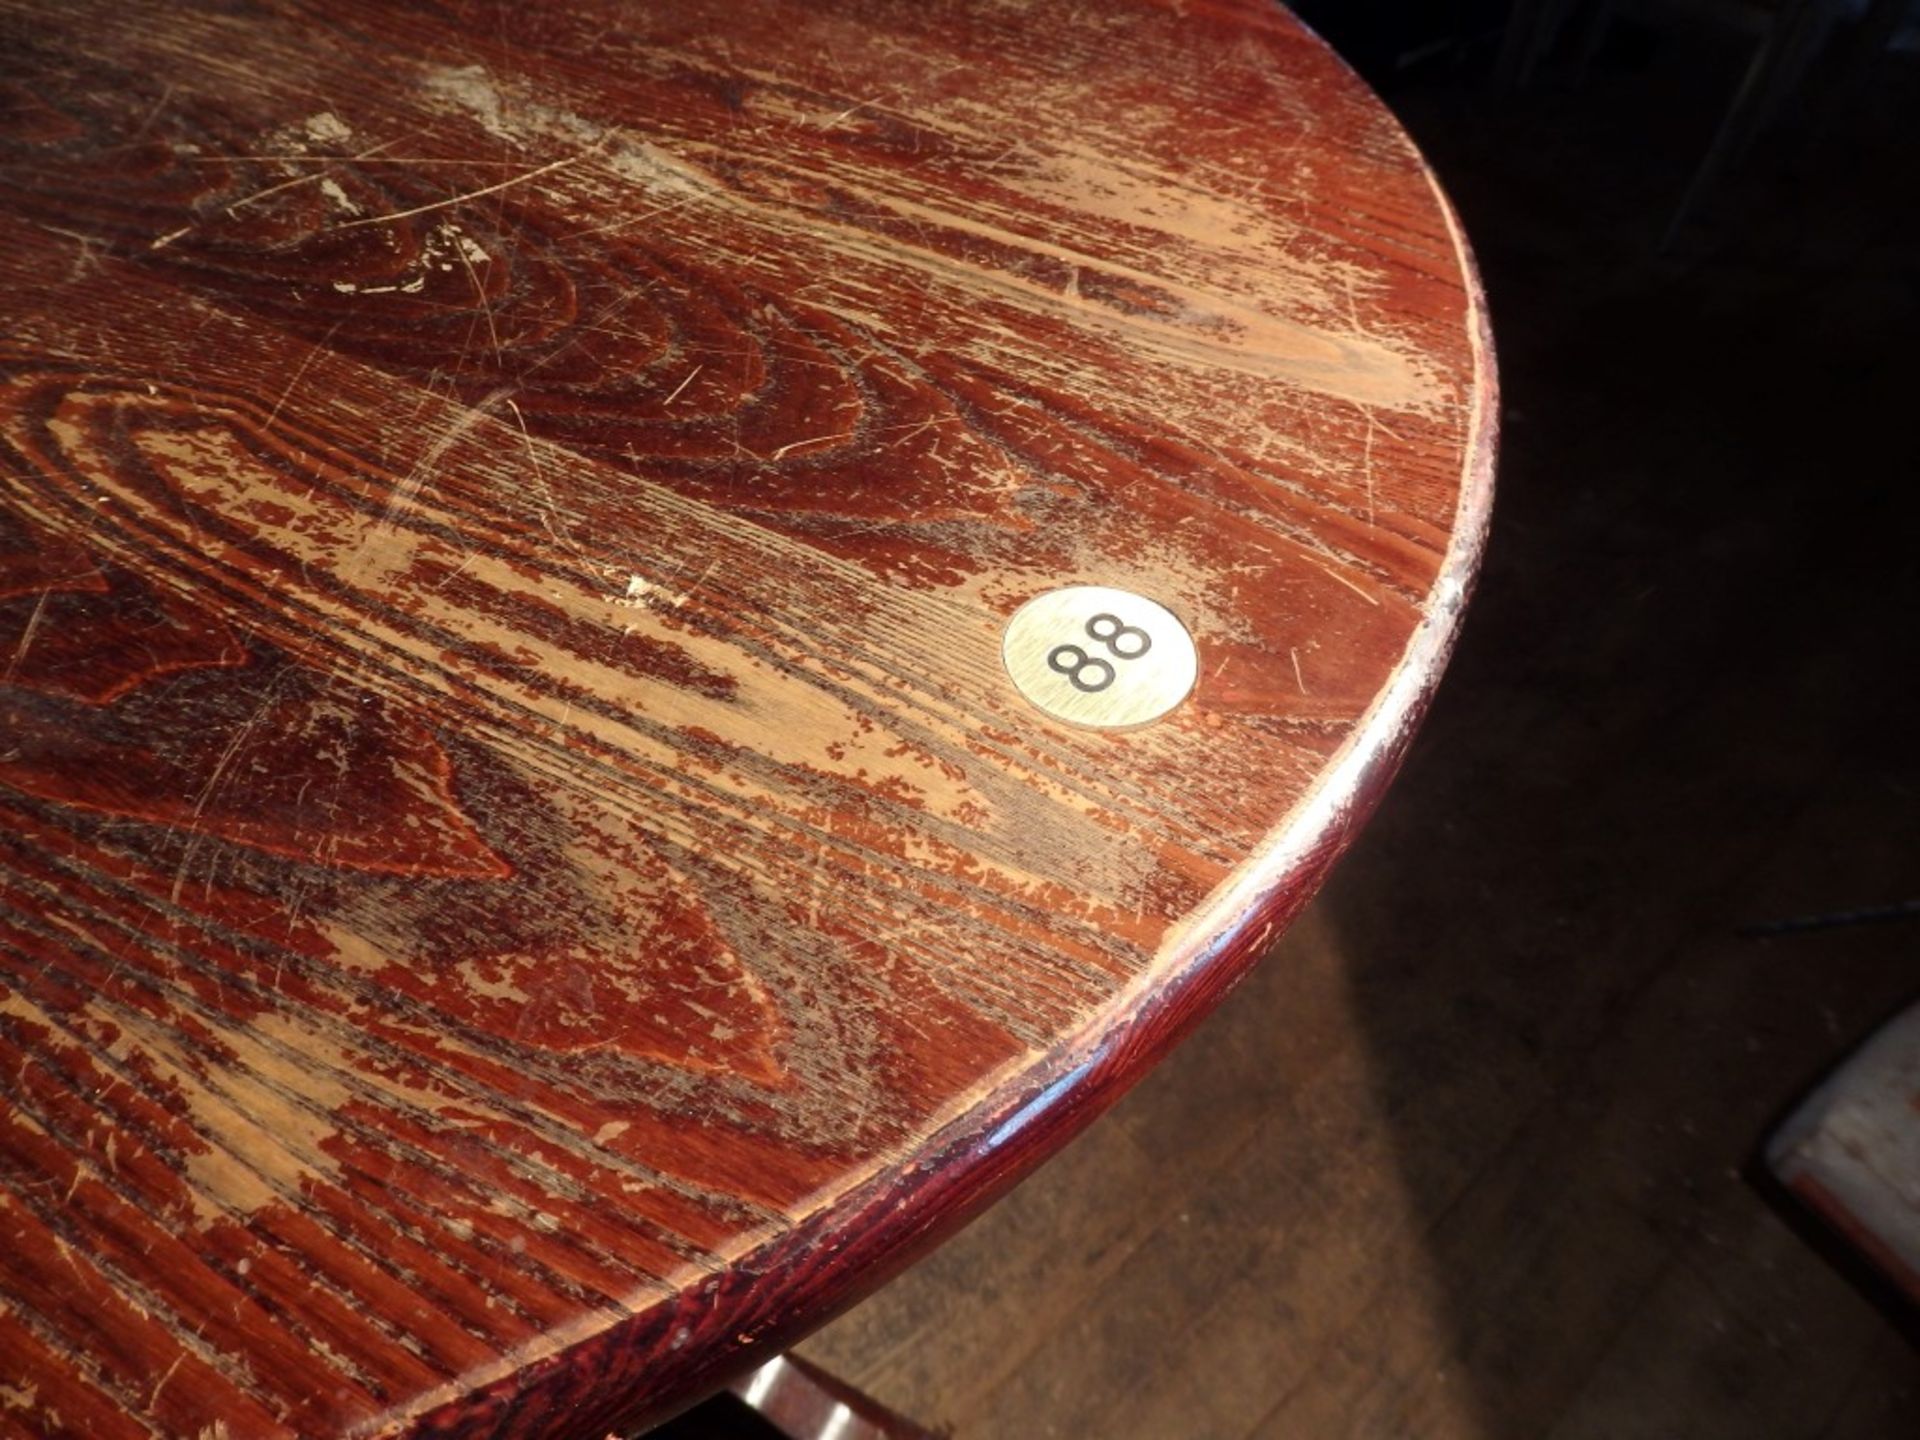 4 x Round Solid Wood Bistro Tables - All Recently Taken From A Bar & Restaurant Environment - - Image 4 of 4